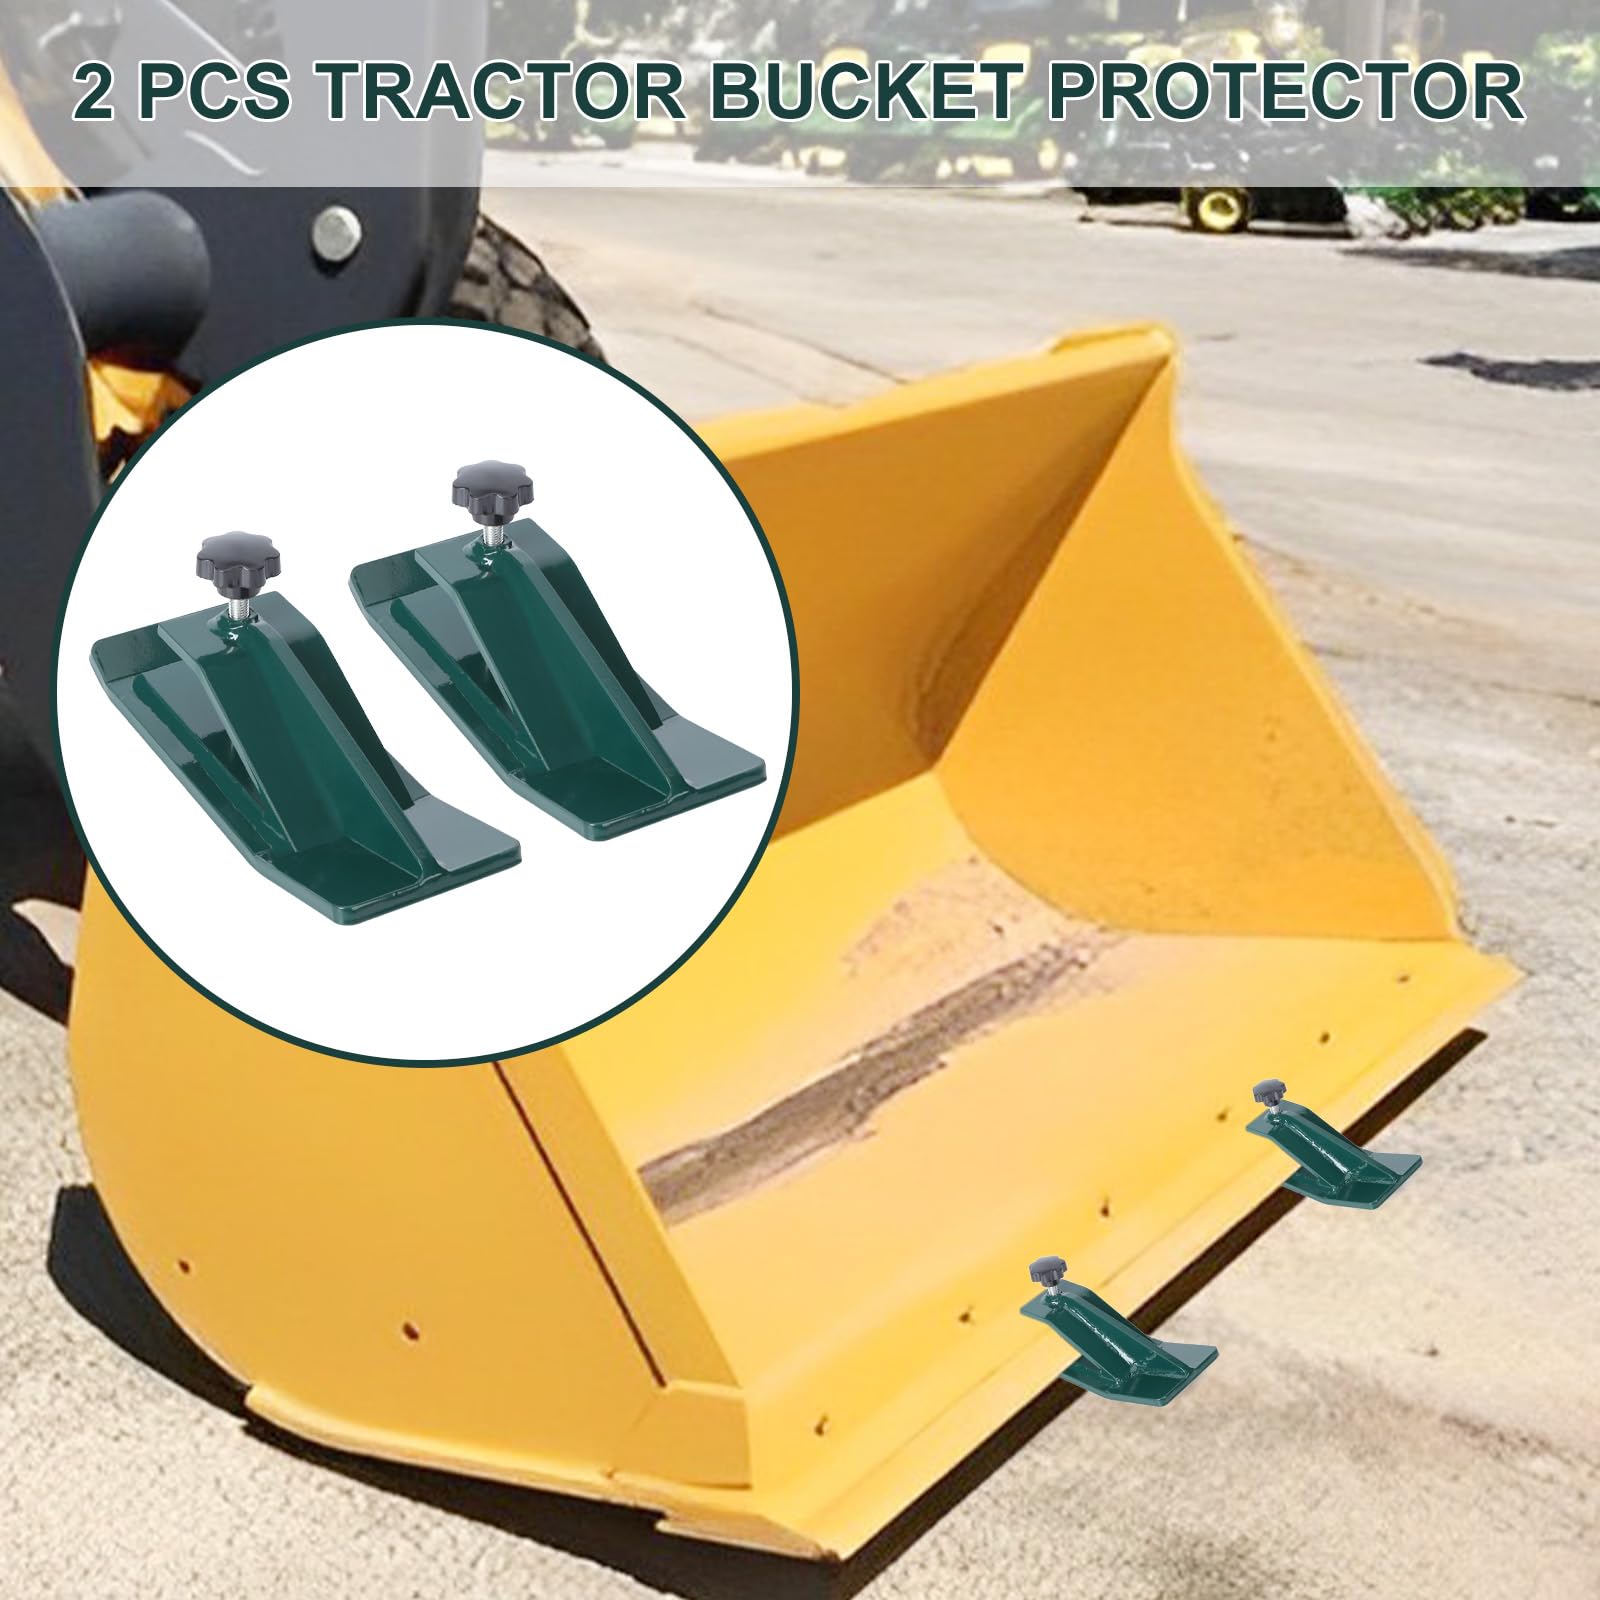 Tractor Bucket Protector, 2pcs Ski Edge Protector, Turf Tamer Skid Protector, Heavy Duty Steel Bucket Edge Anti-Skid Device, Bucket Attachment for Snow Leaves Removal Spreading Gravel